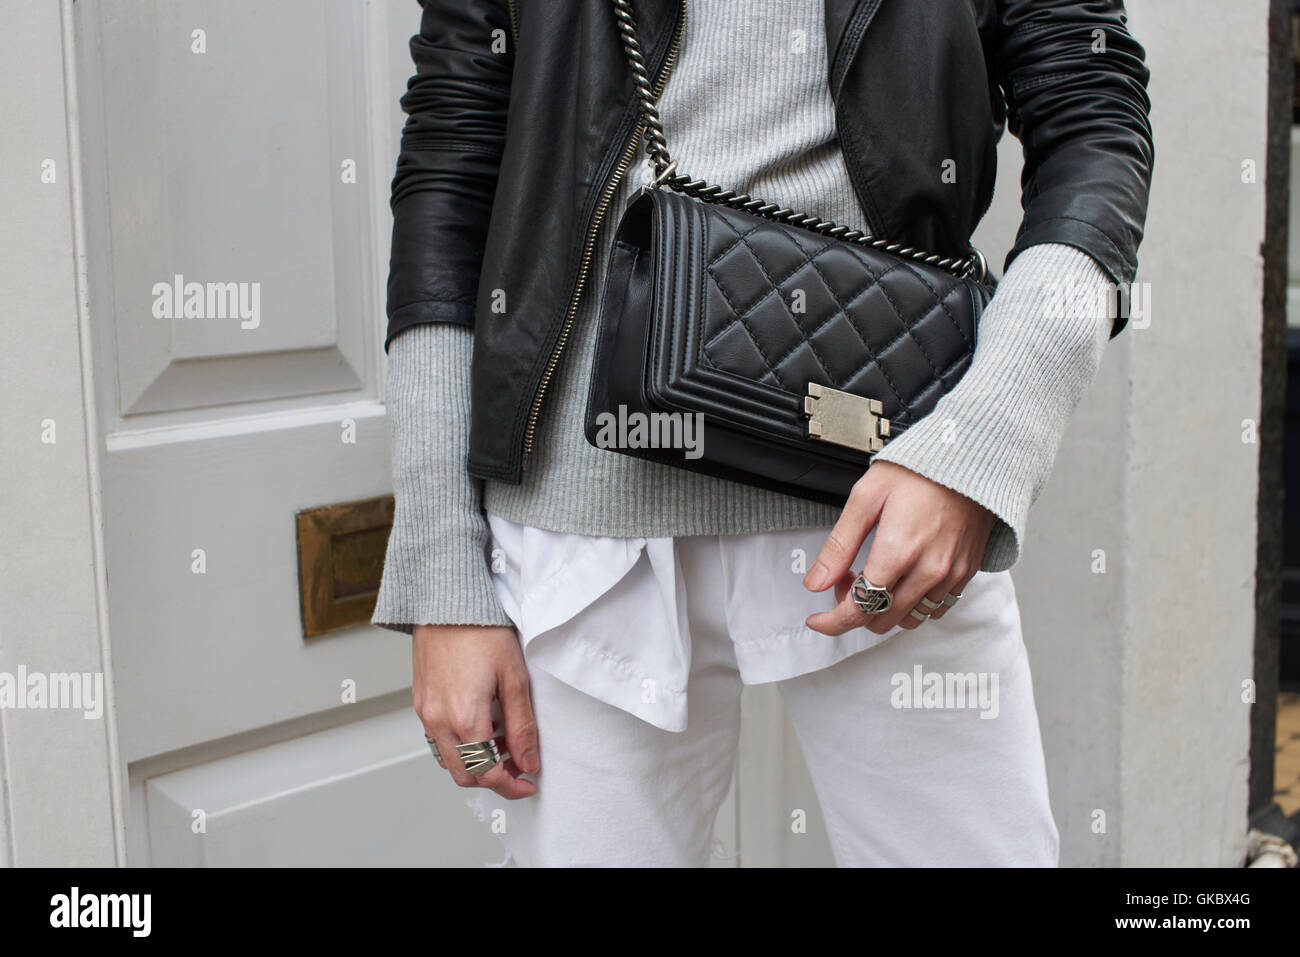 Mid section of fashionable man with a designer handbag Stock Photo